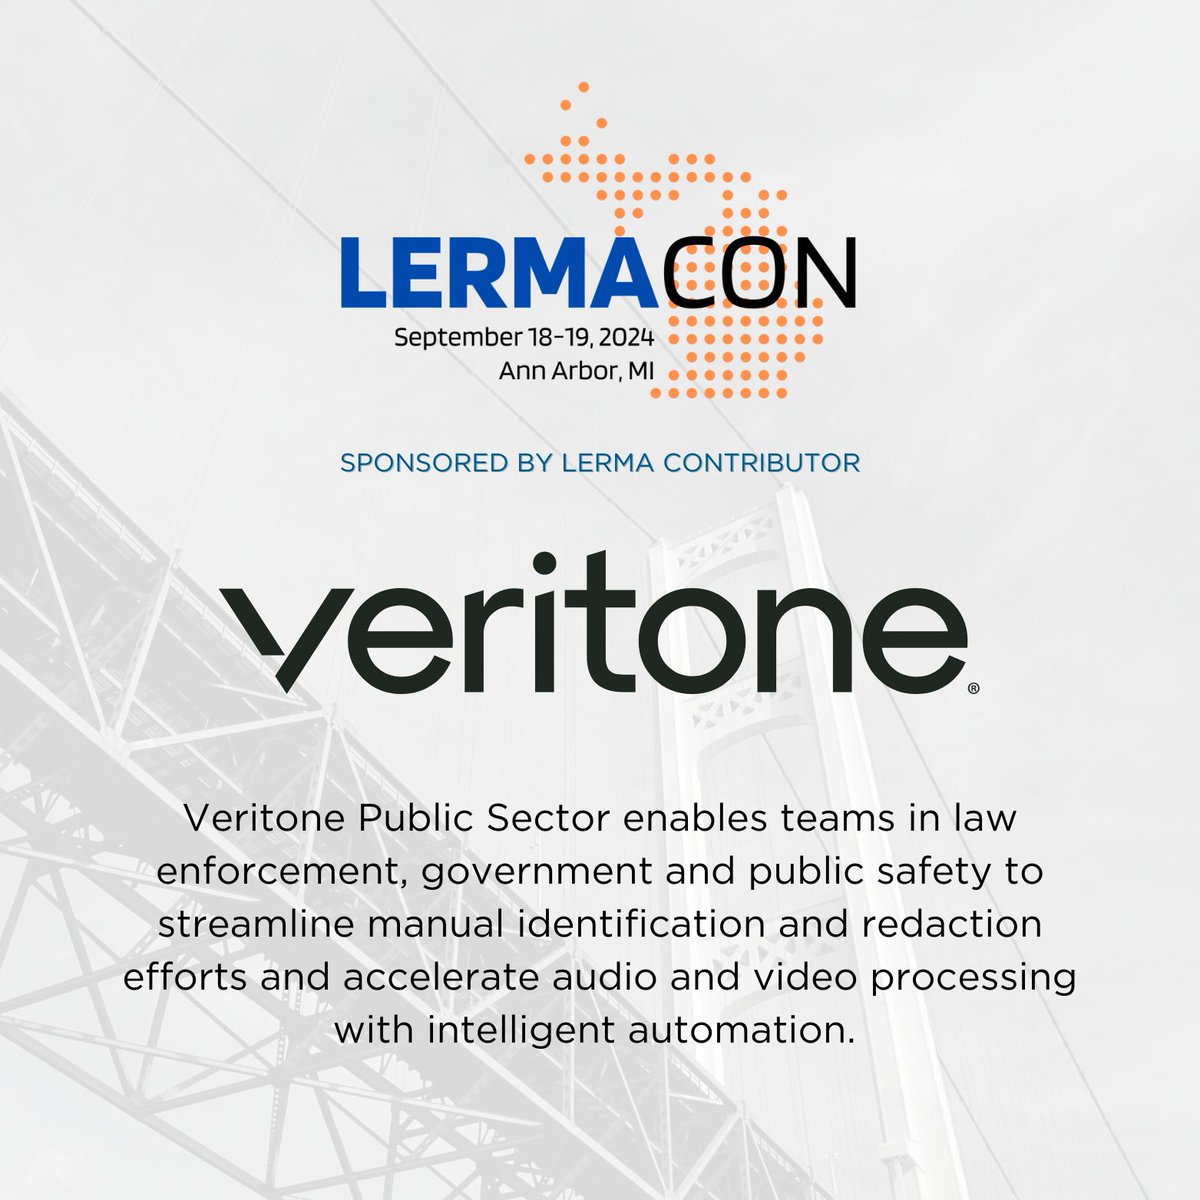 LERMA would like to thank our first sponsor of LERMACON, Veritone! 

If you aren't registered for LERMACON, you should be!  Get more information here: lermainc.org/LERMACON.aspx

#Police #LawEnforcement #FOIA #michiganlawenforcement #RecordsManagement #PublicSafety #Michigan